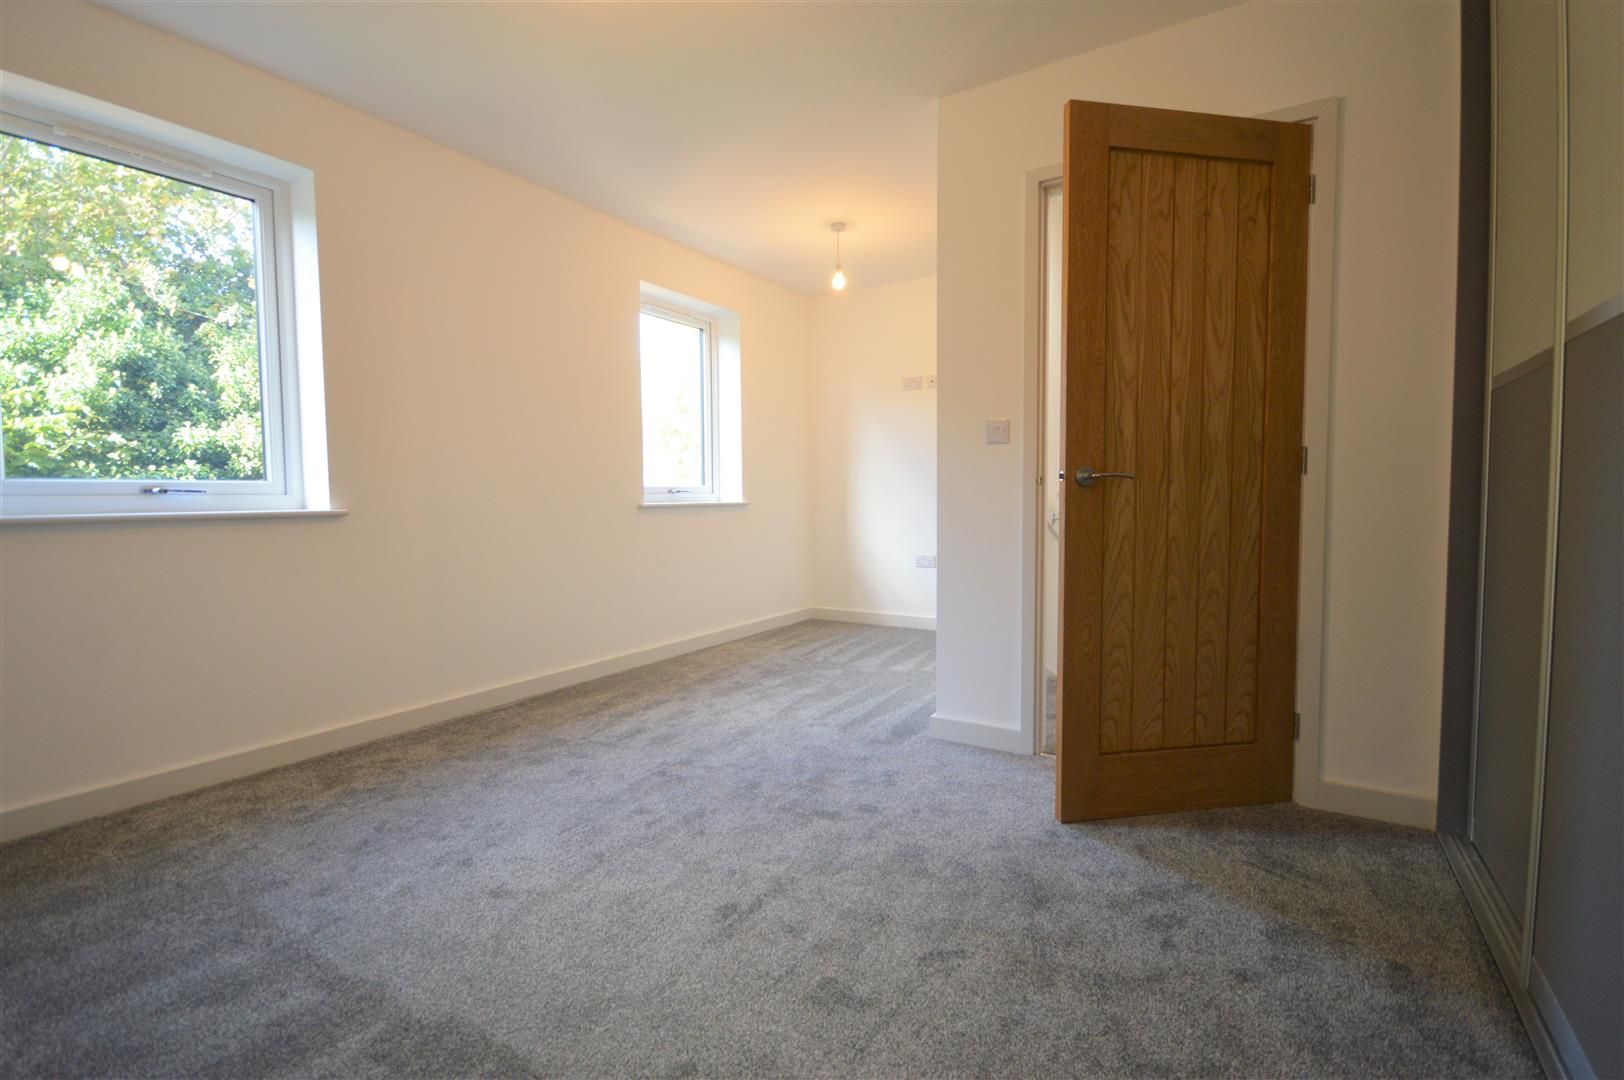 2 bed terraced for sale in Leominster  - Property Image 10